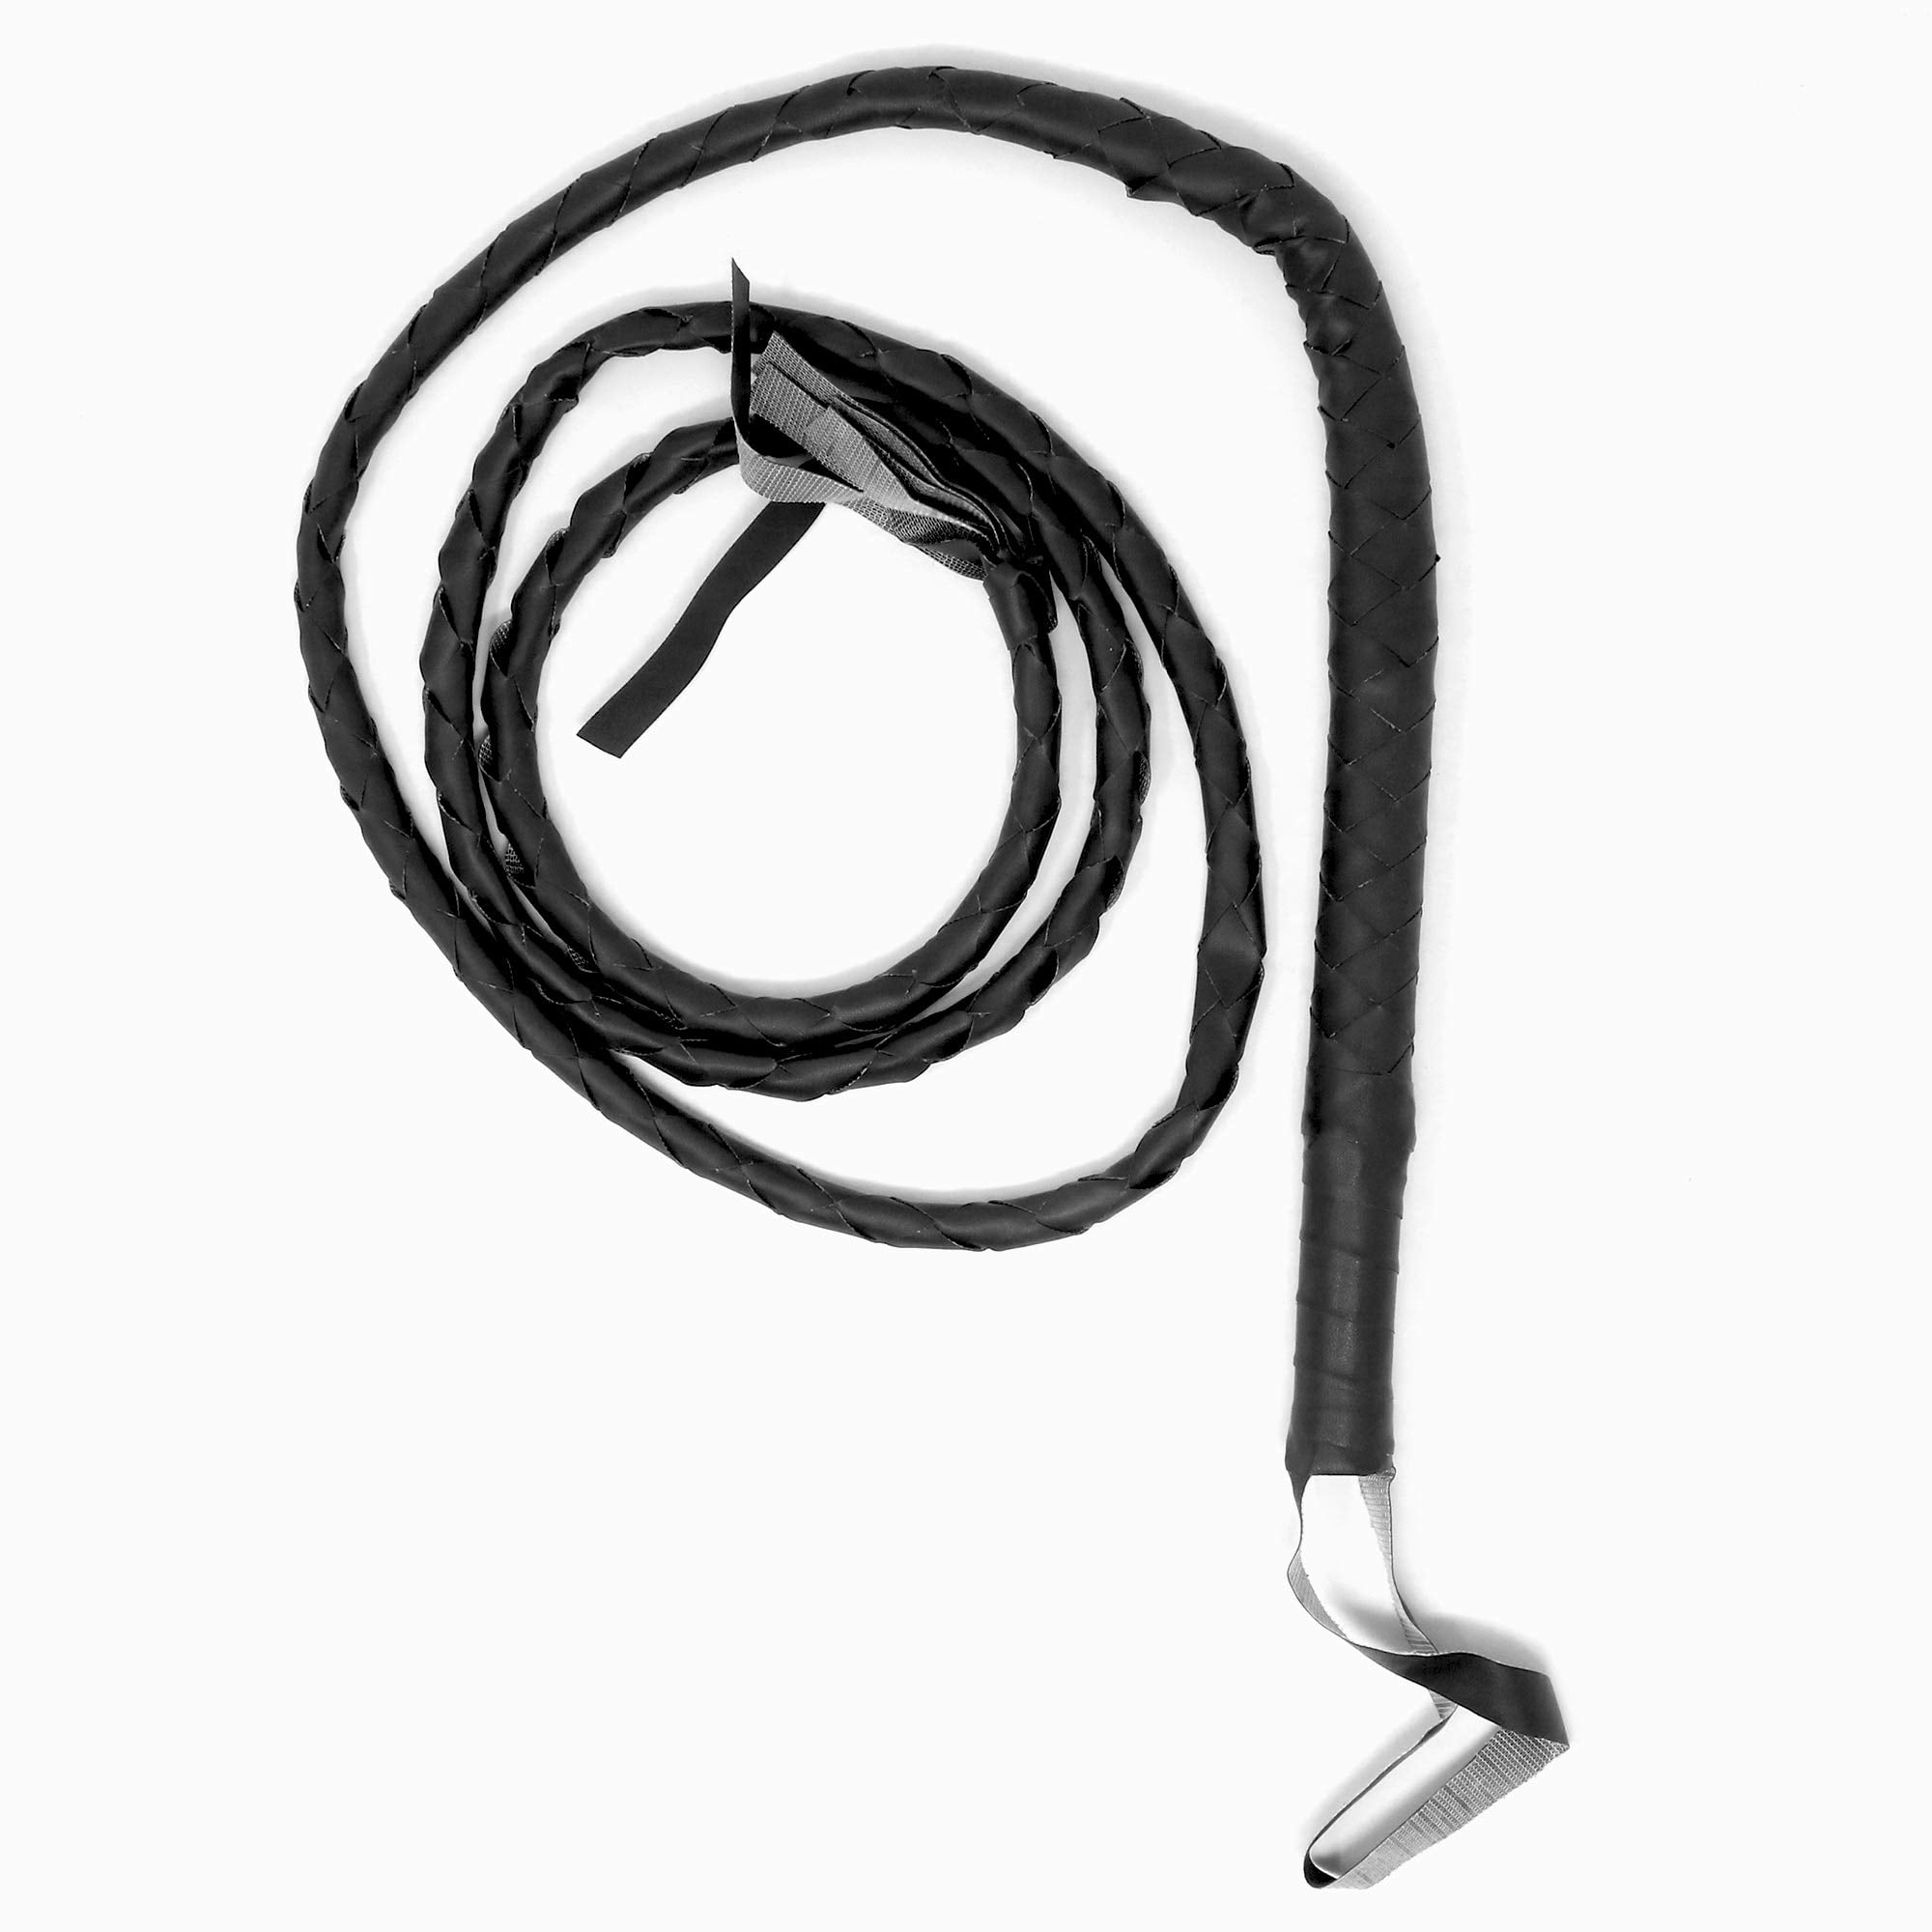 Classic SM Whip Black buy cheap here now